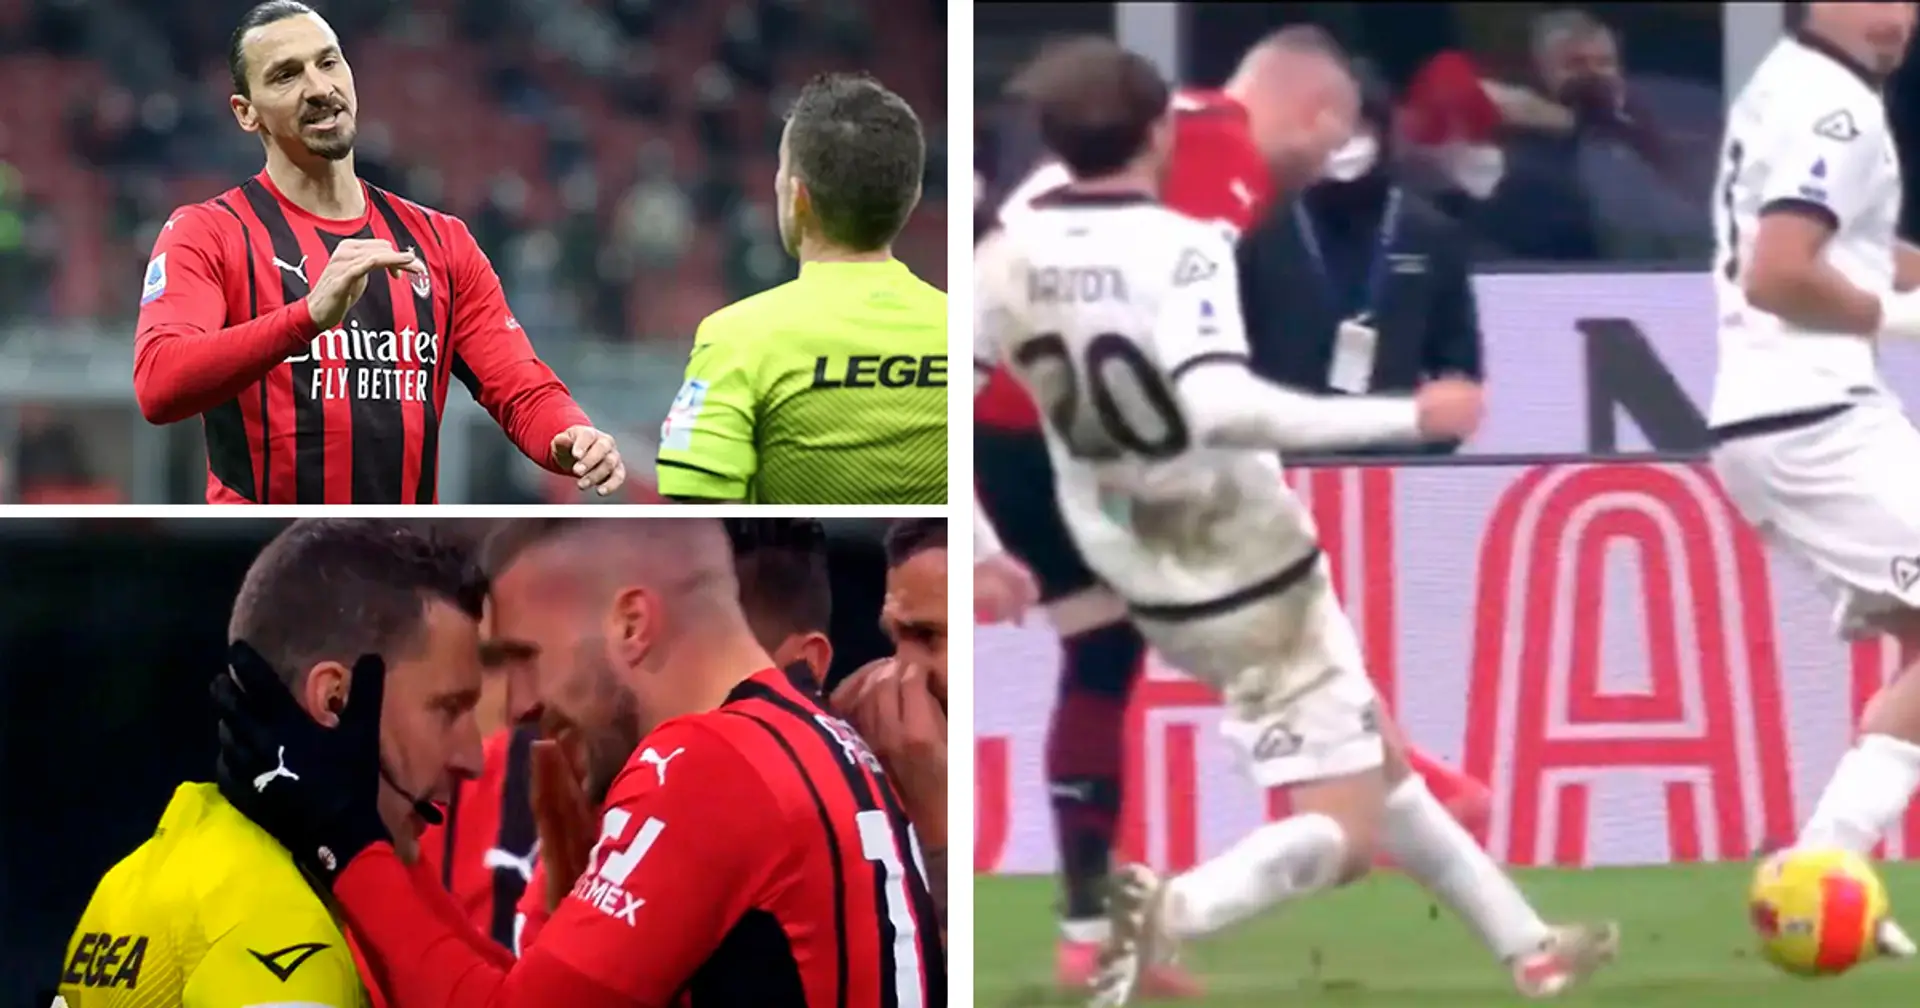 Referee breaks down in tears after making shocking mistake in Milan’s defeat to Spezia, Ibrahimovic consoled him 